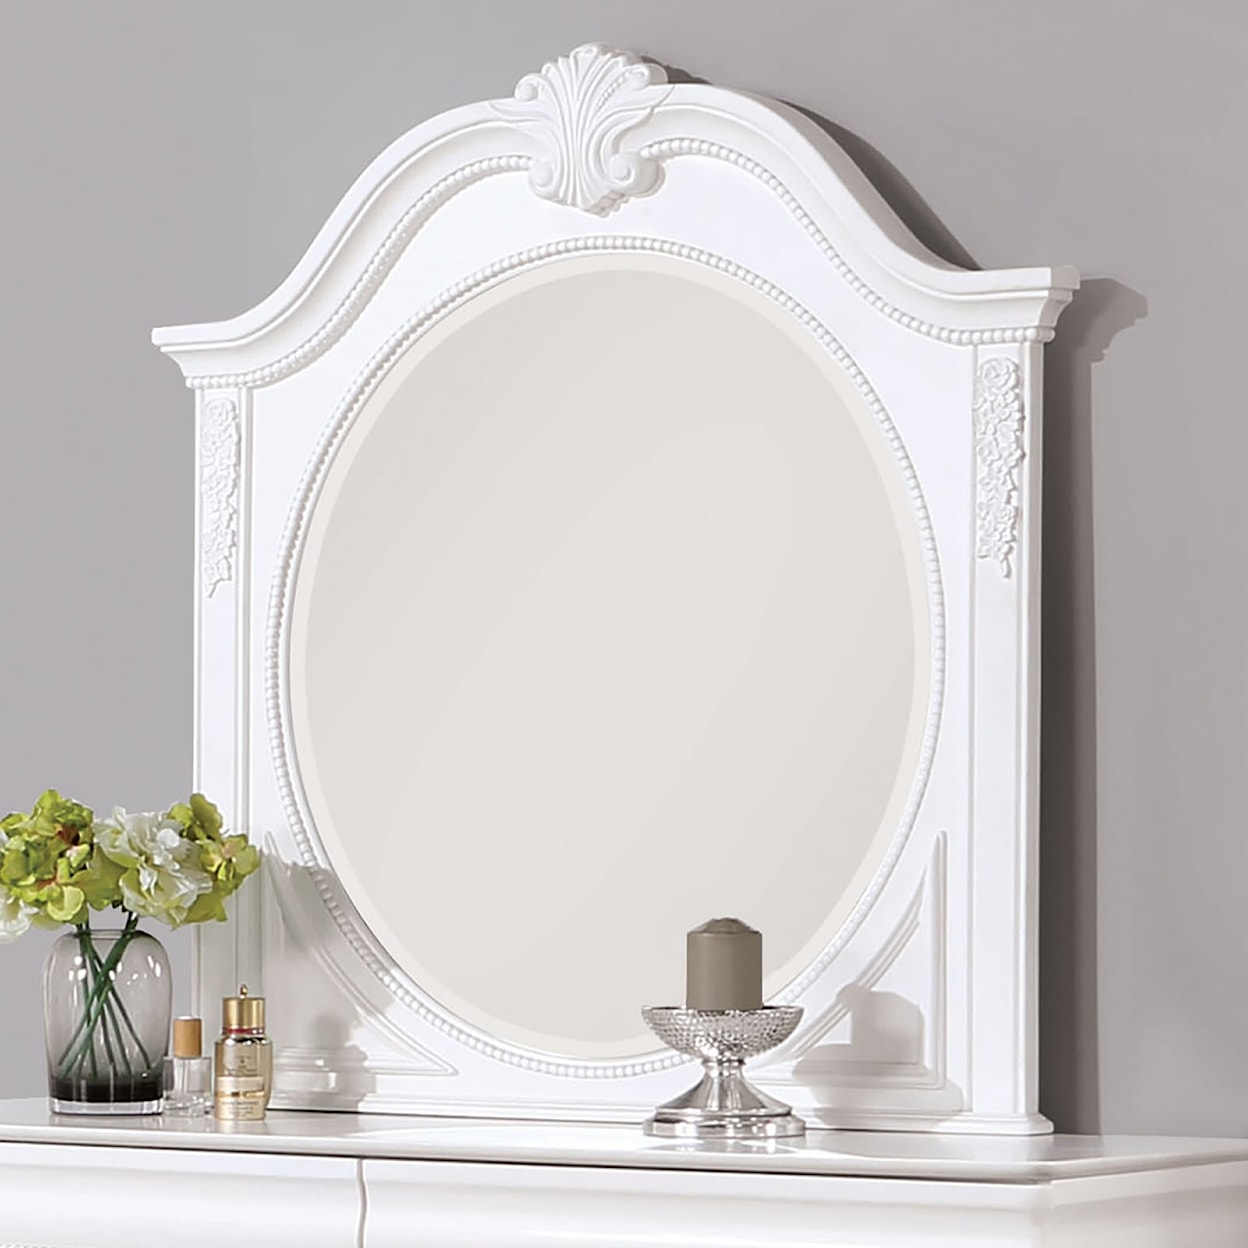 Furniture of America Alecia Arched Bell-shaped Dresser Mirror